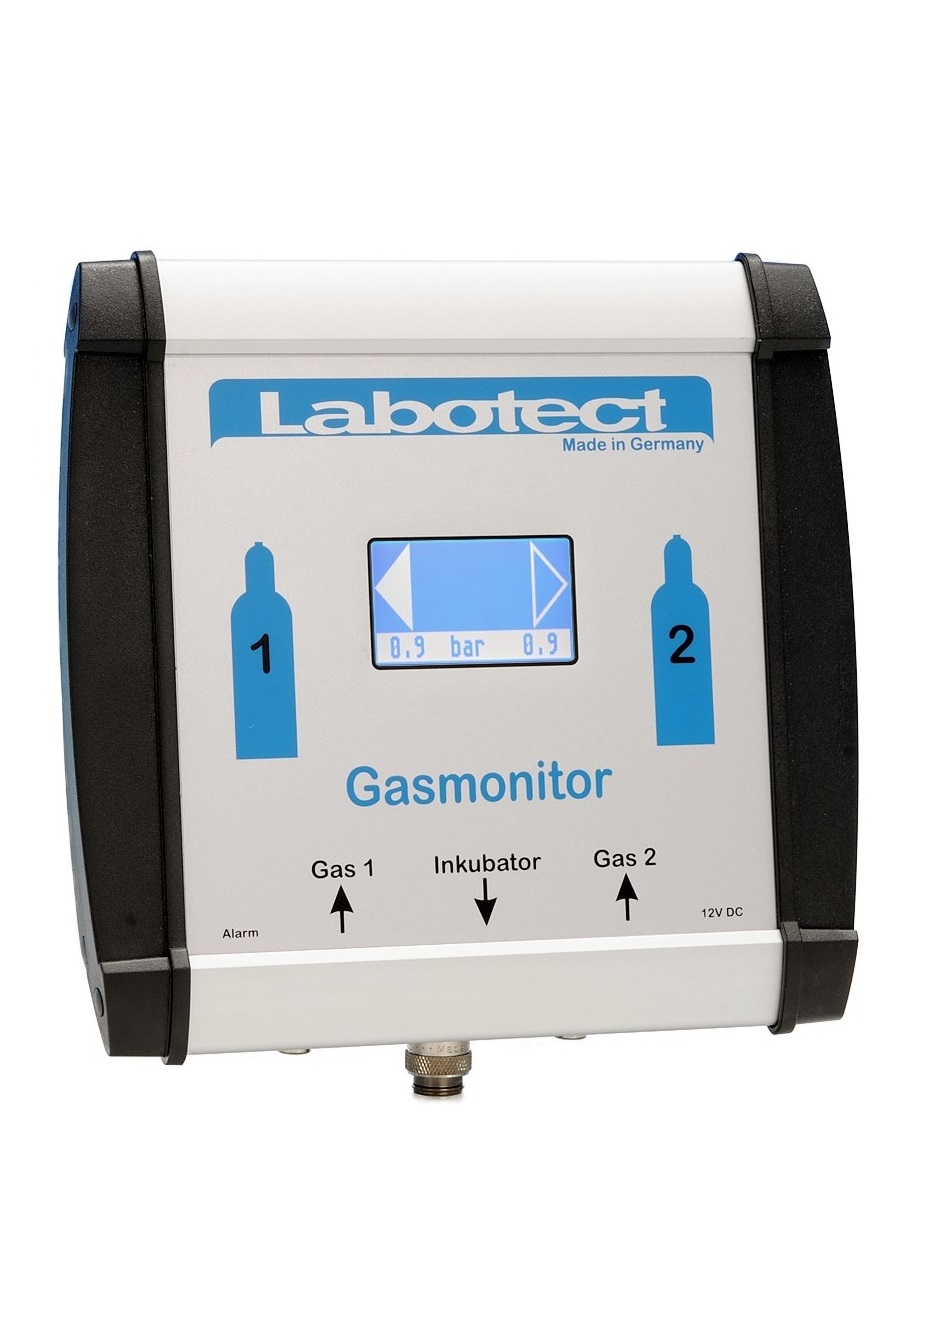 Two bottles can be connected with the Gasmomitor  and changes can be made via  touchscreen display.